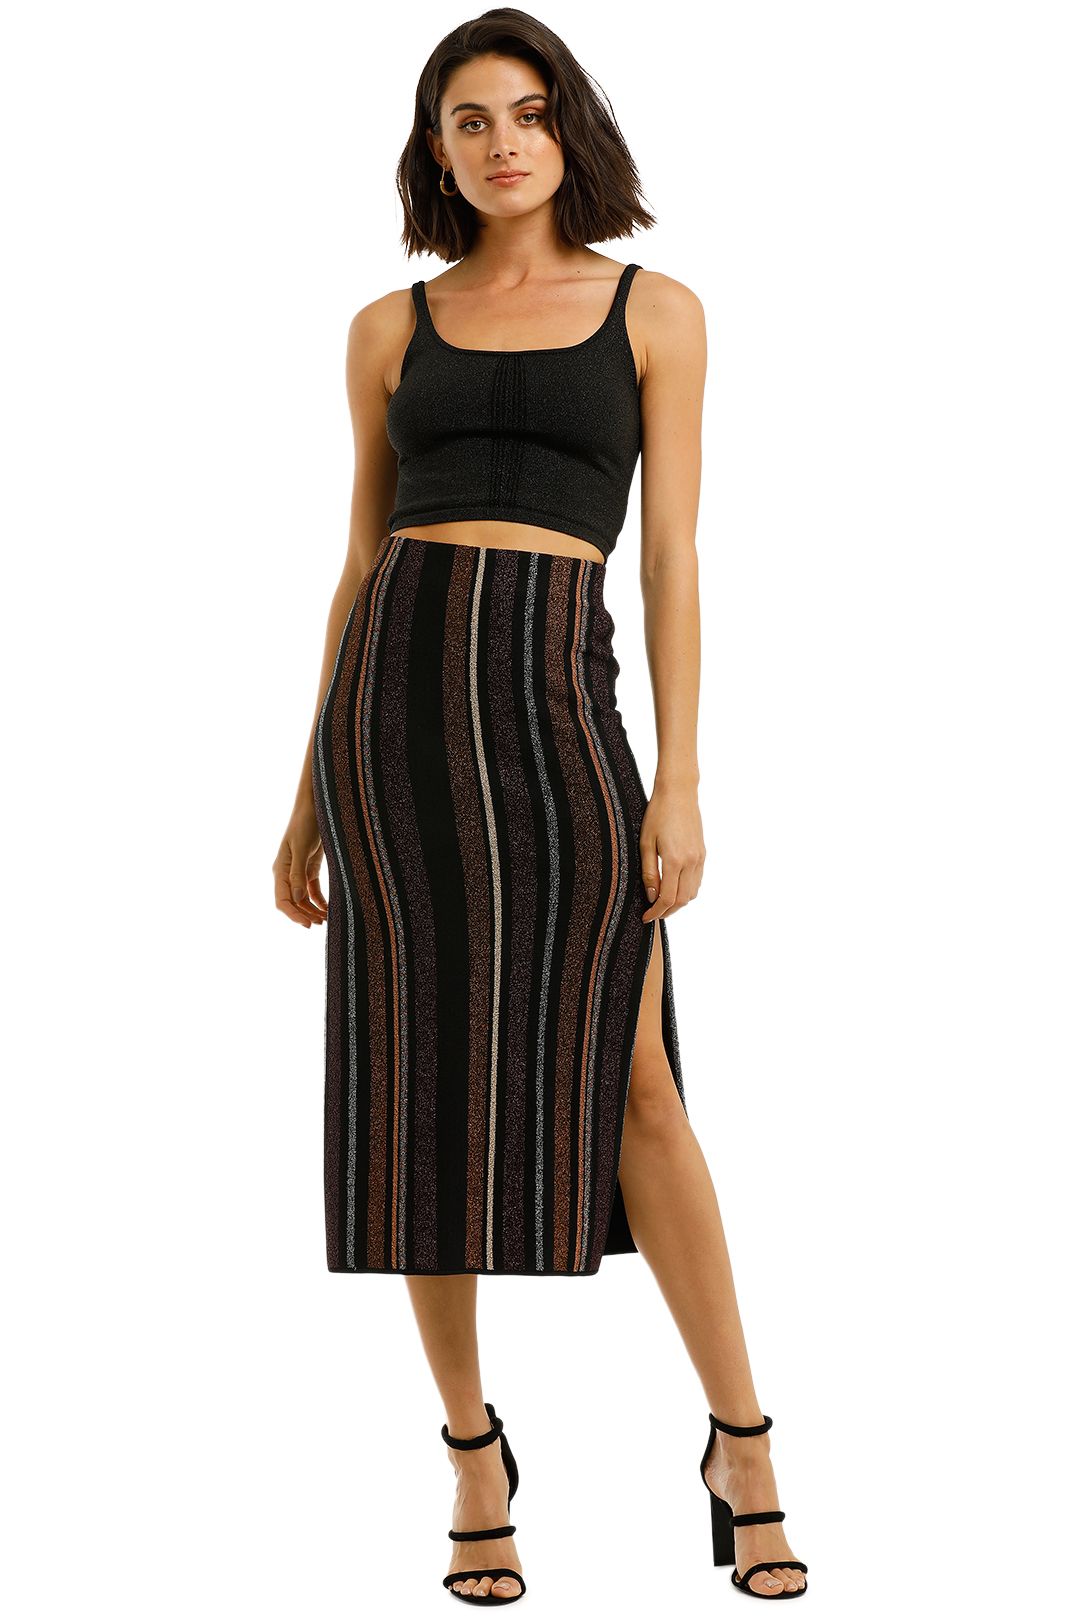 Camilla-and-Marc-Ziggy-Knit-Skirt-Front